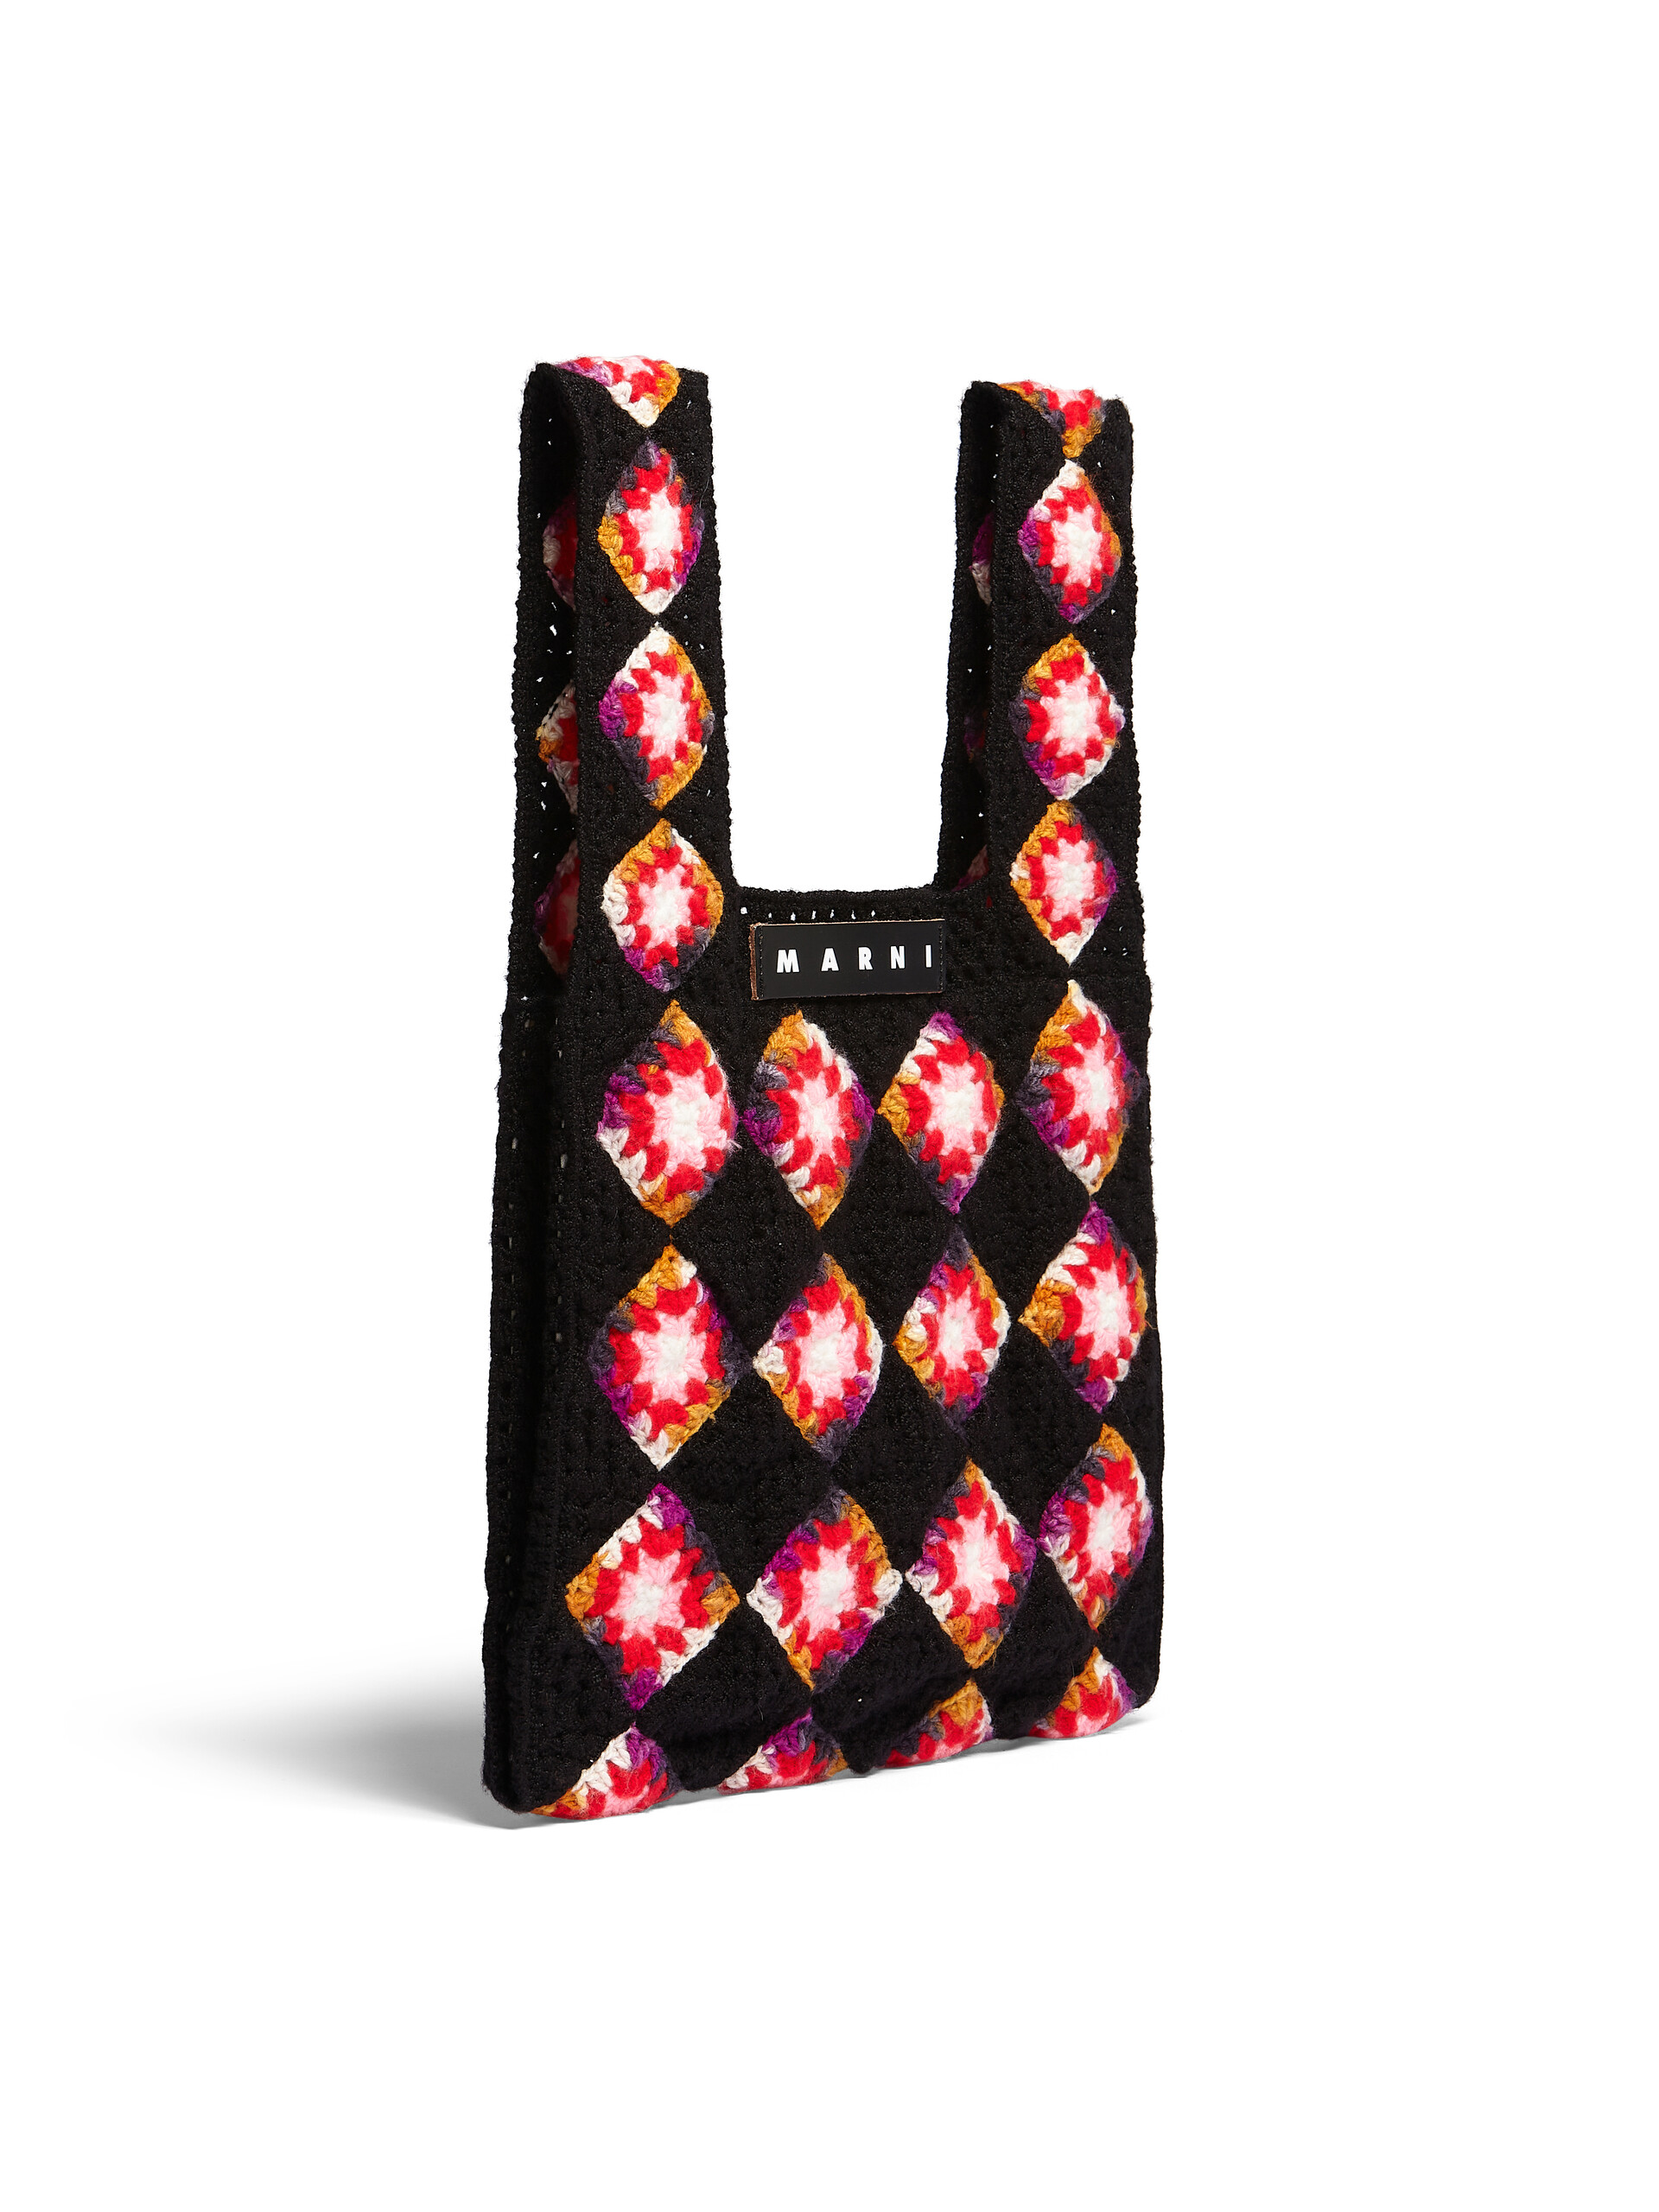 MARNI MARKET FISH in black and red crochet - Shopping Bags - Image 2